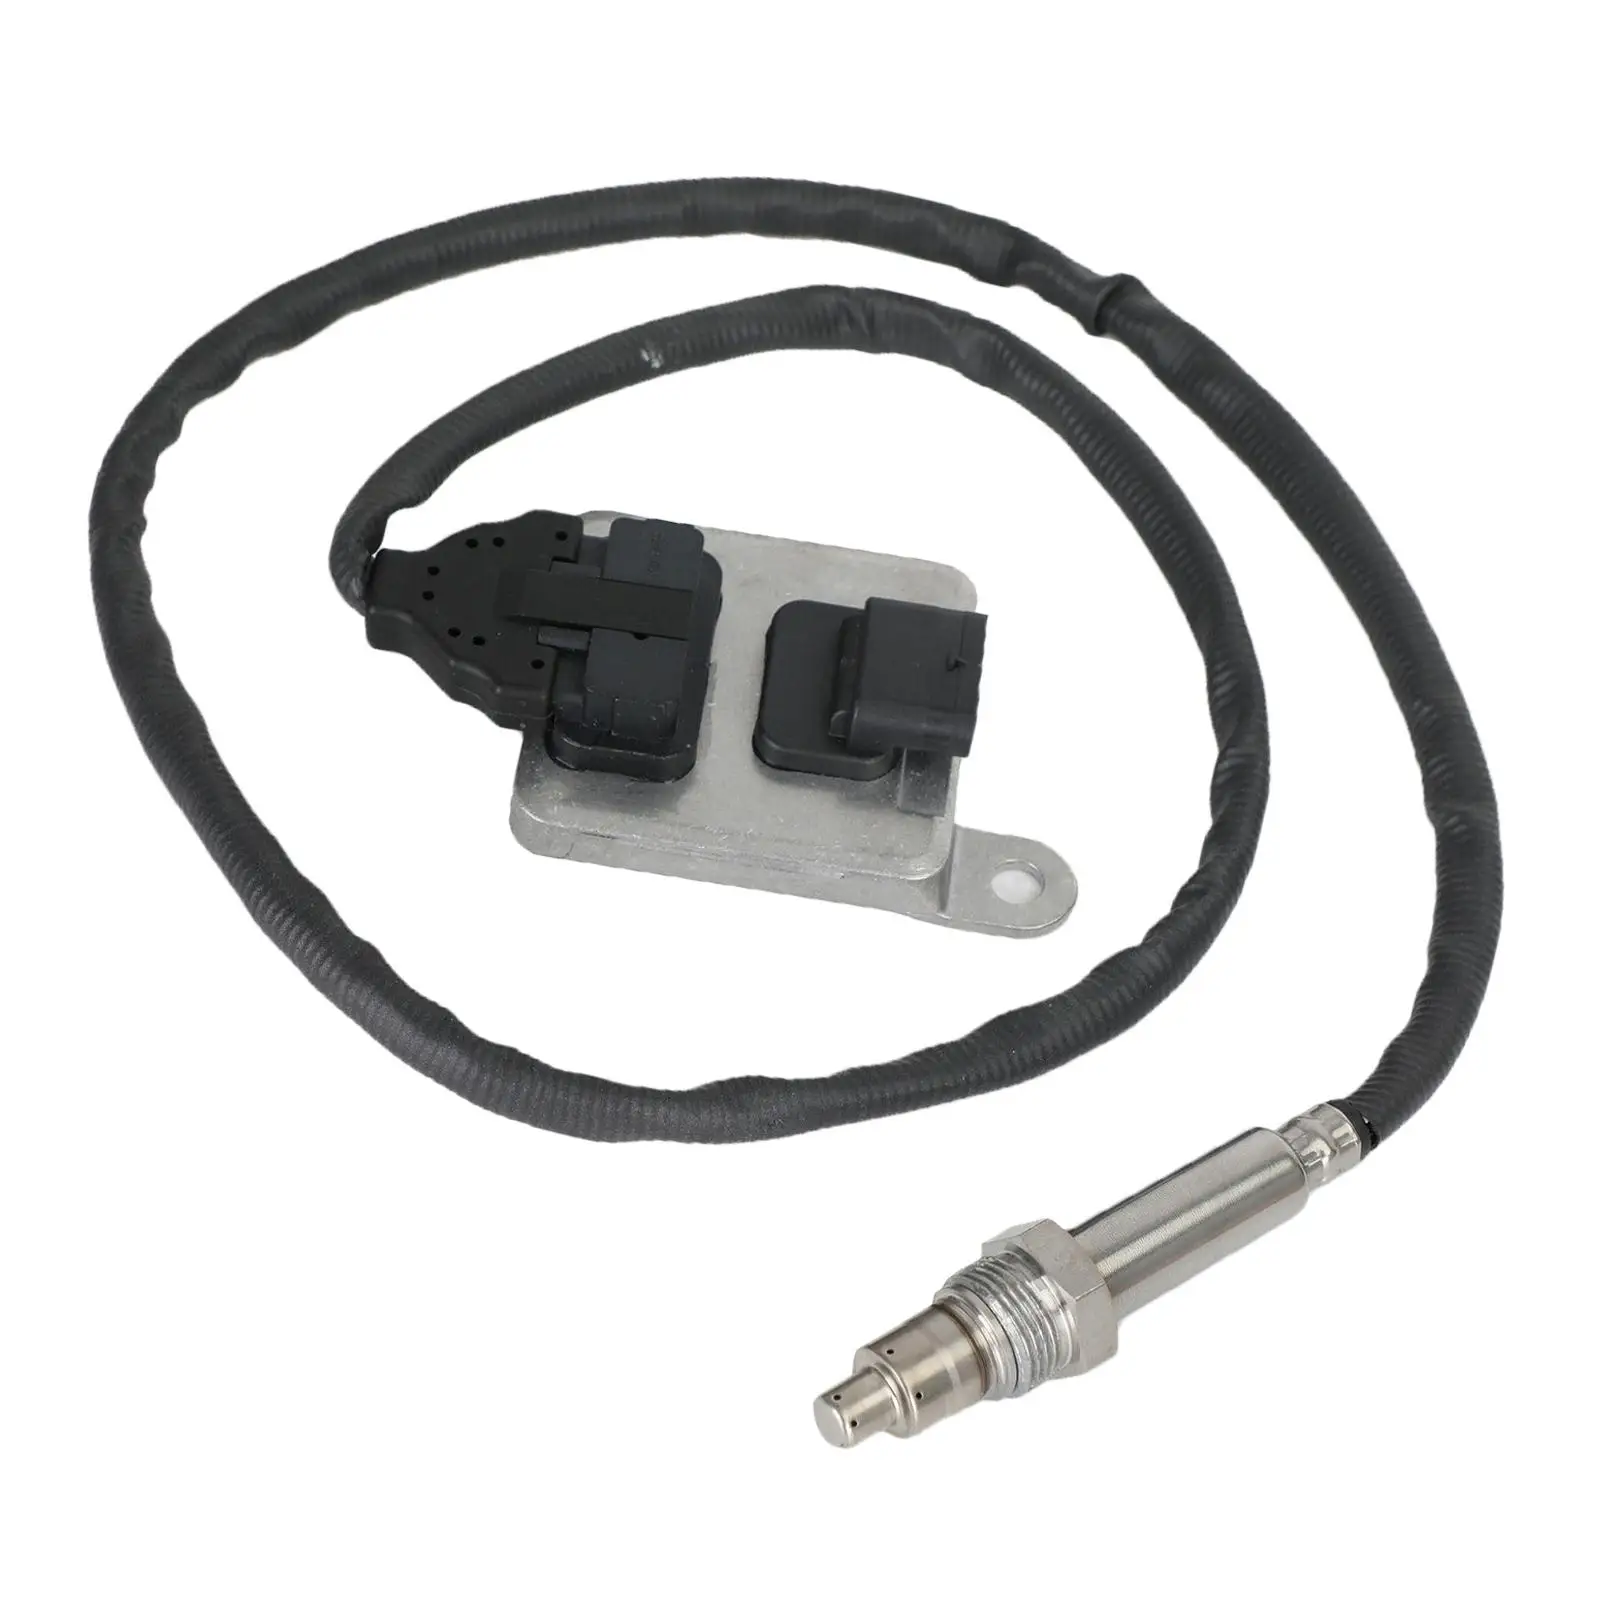   Sensor Automotive Direct Replaces Spare Parts Easy to Install Durable High Performance Fit for  89823-13911